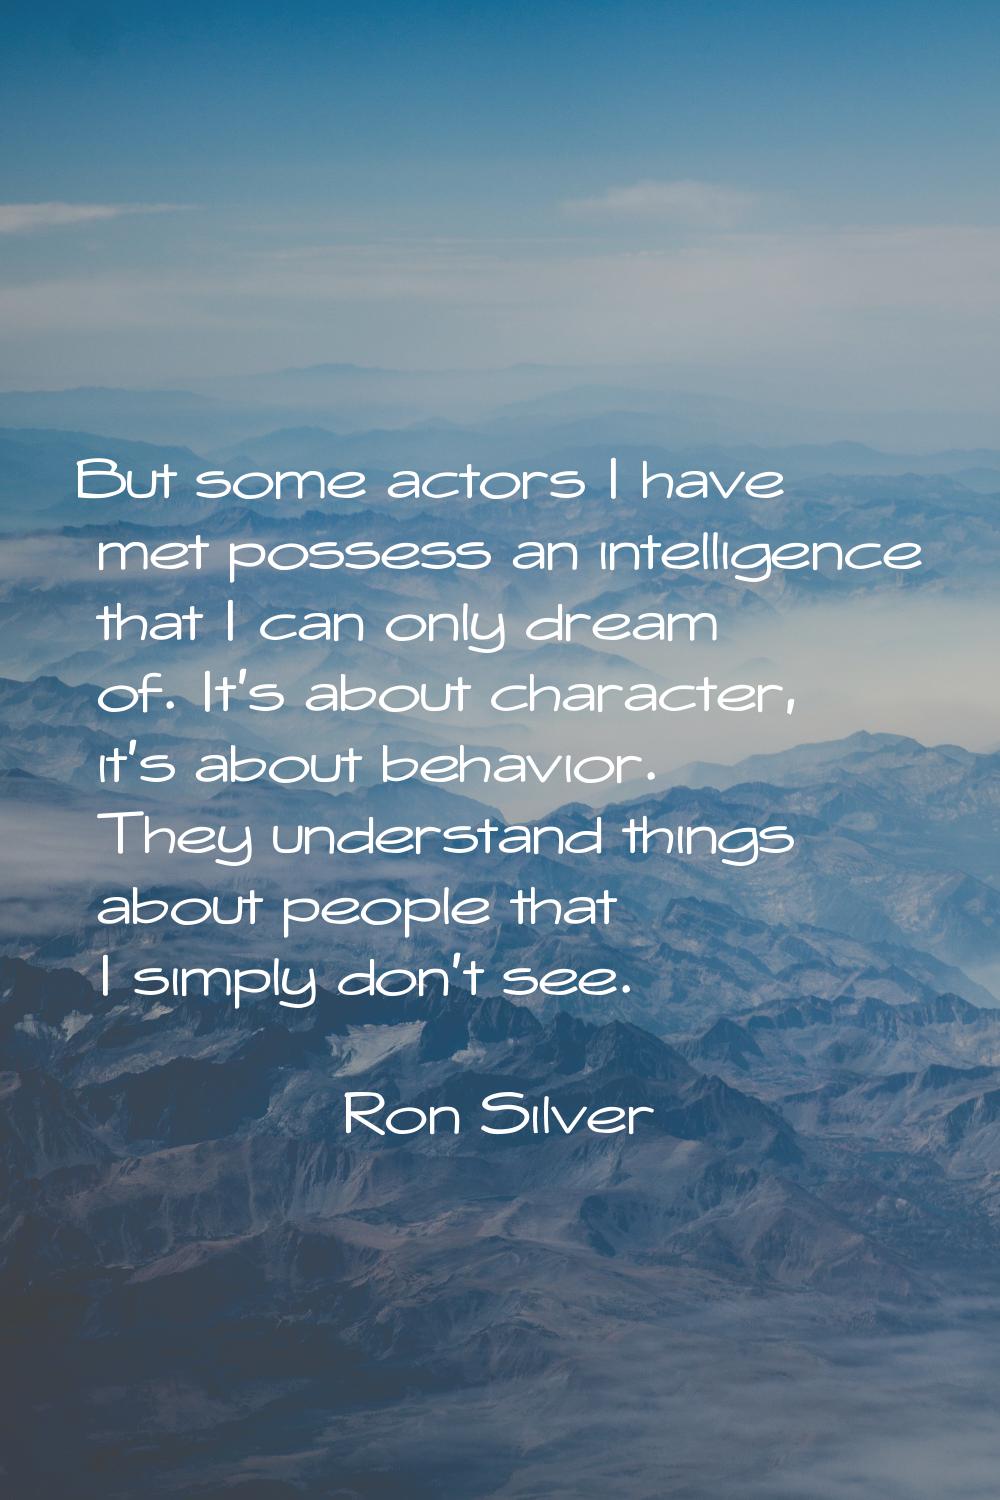 But some actors I have met possess an intelligence that I can only dream of. It's about character, 